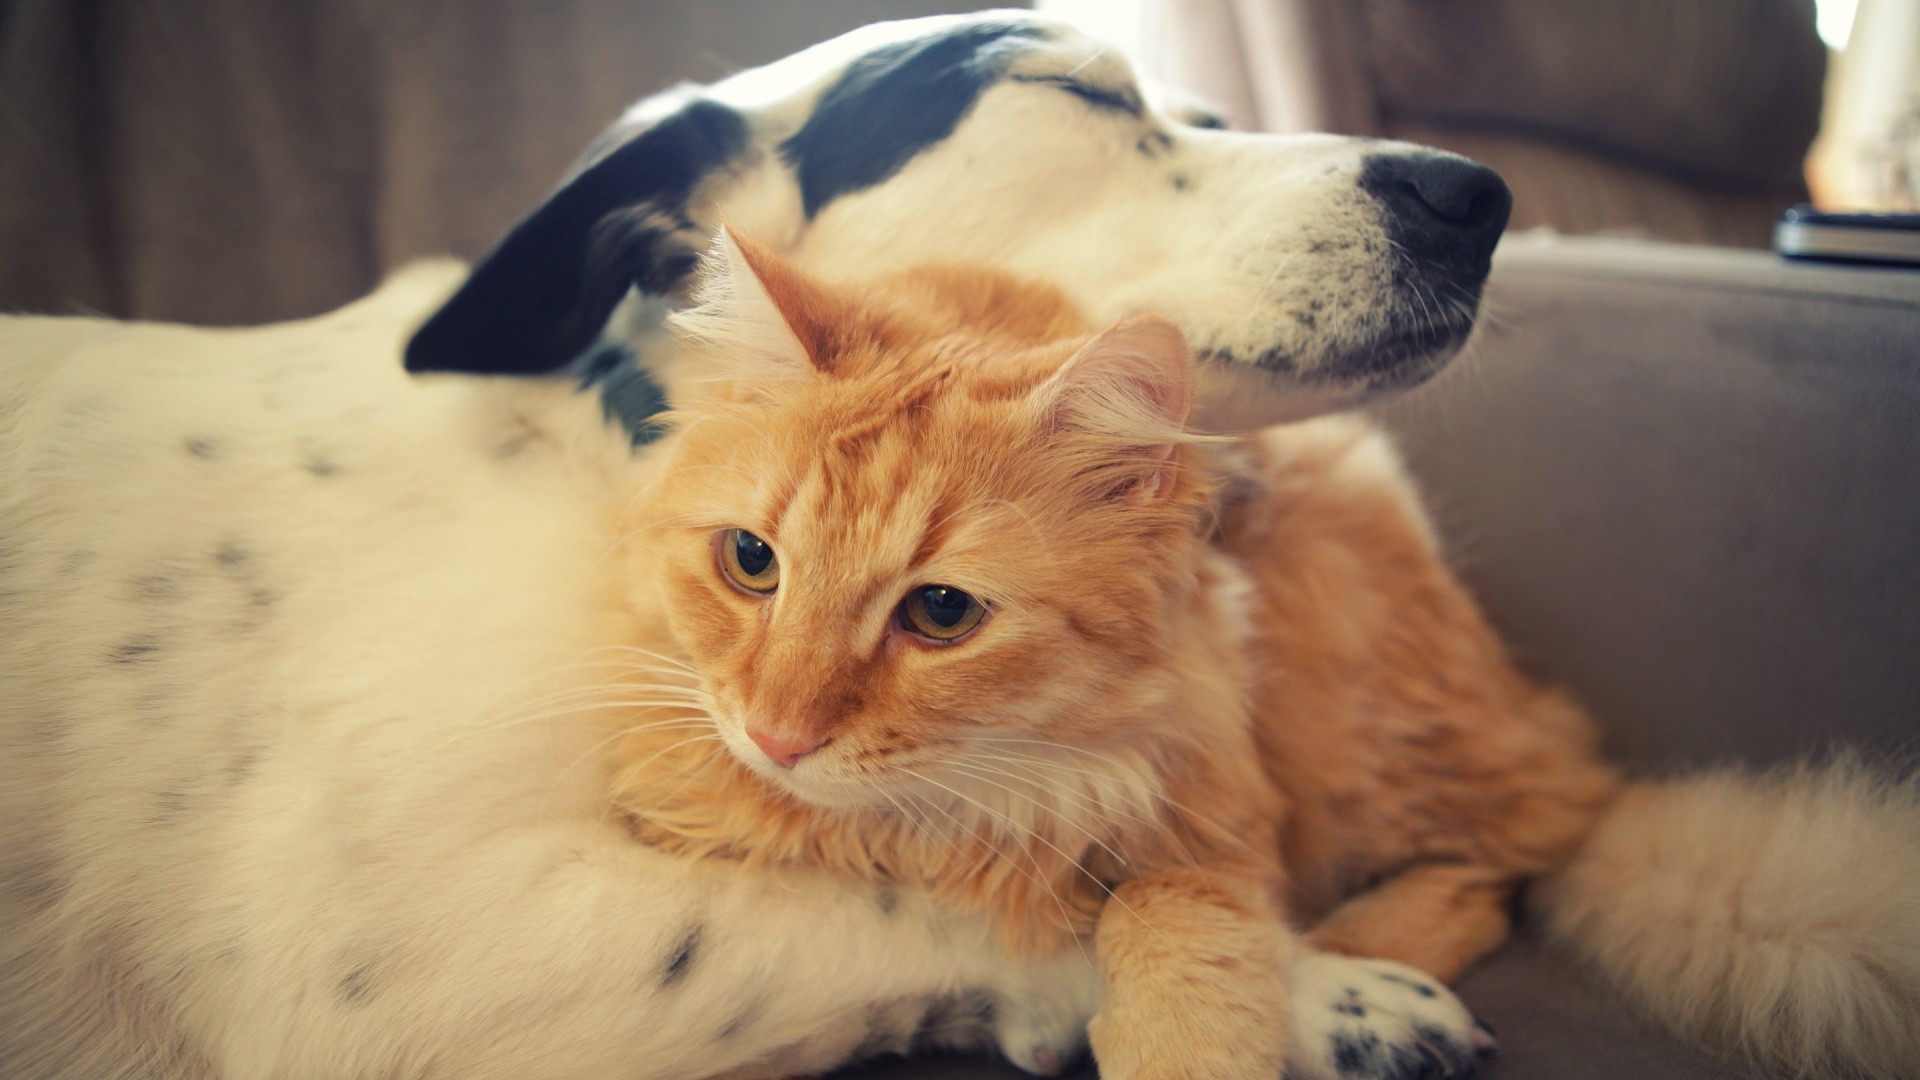 Animal Images Hd, Funny Wallpapers, Cute Animals, Screen, - Cat Dog Love Each Other - HD Wallpaper 